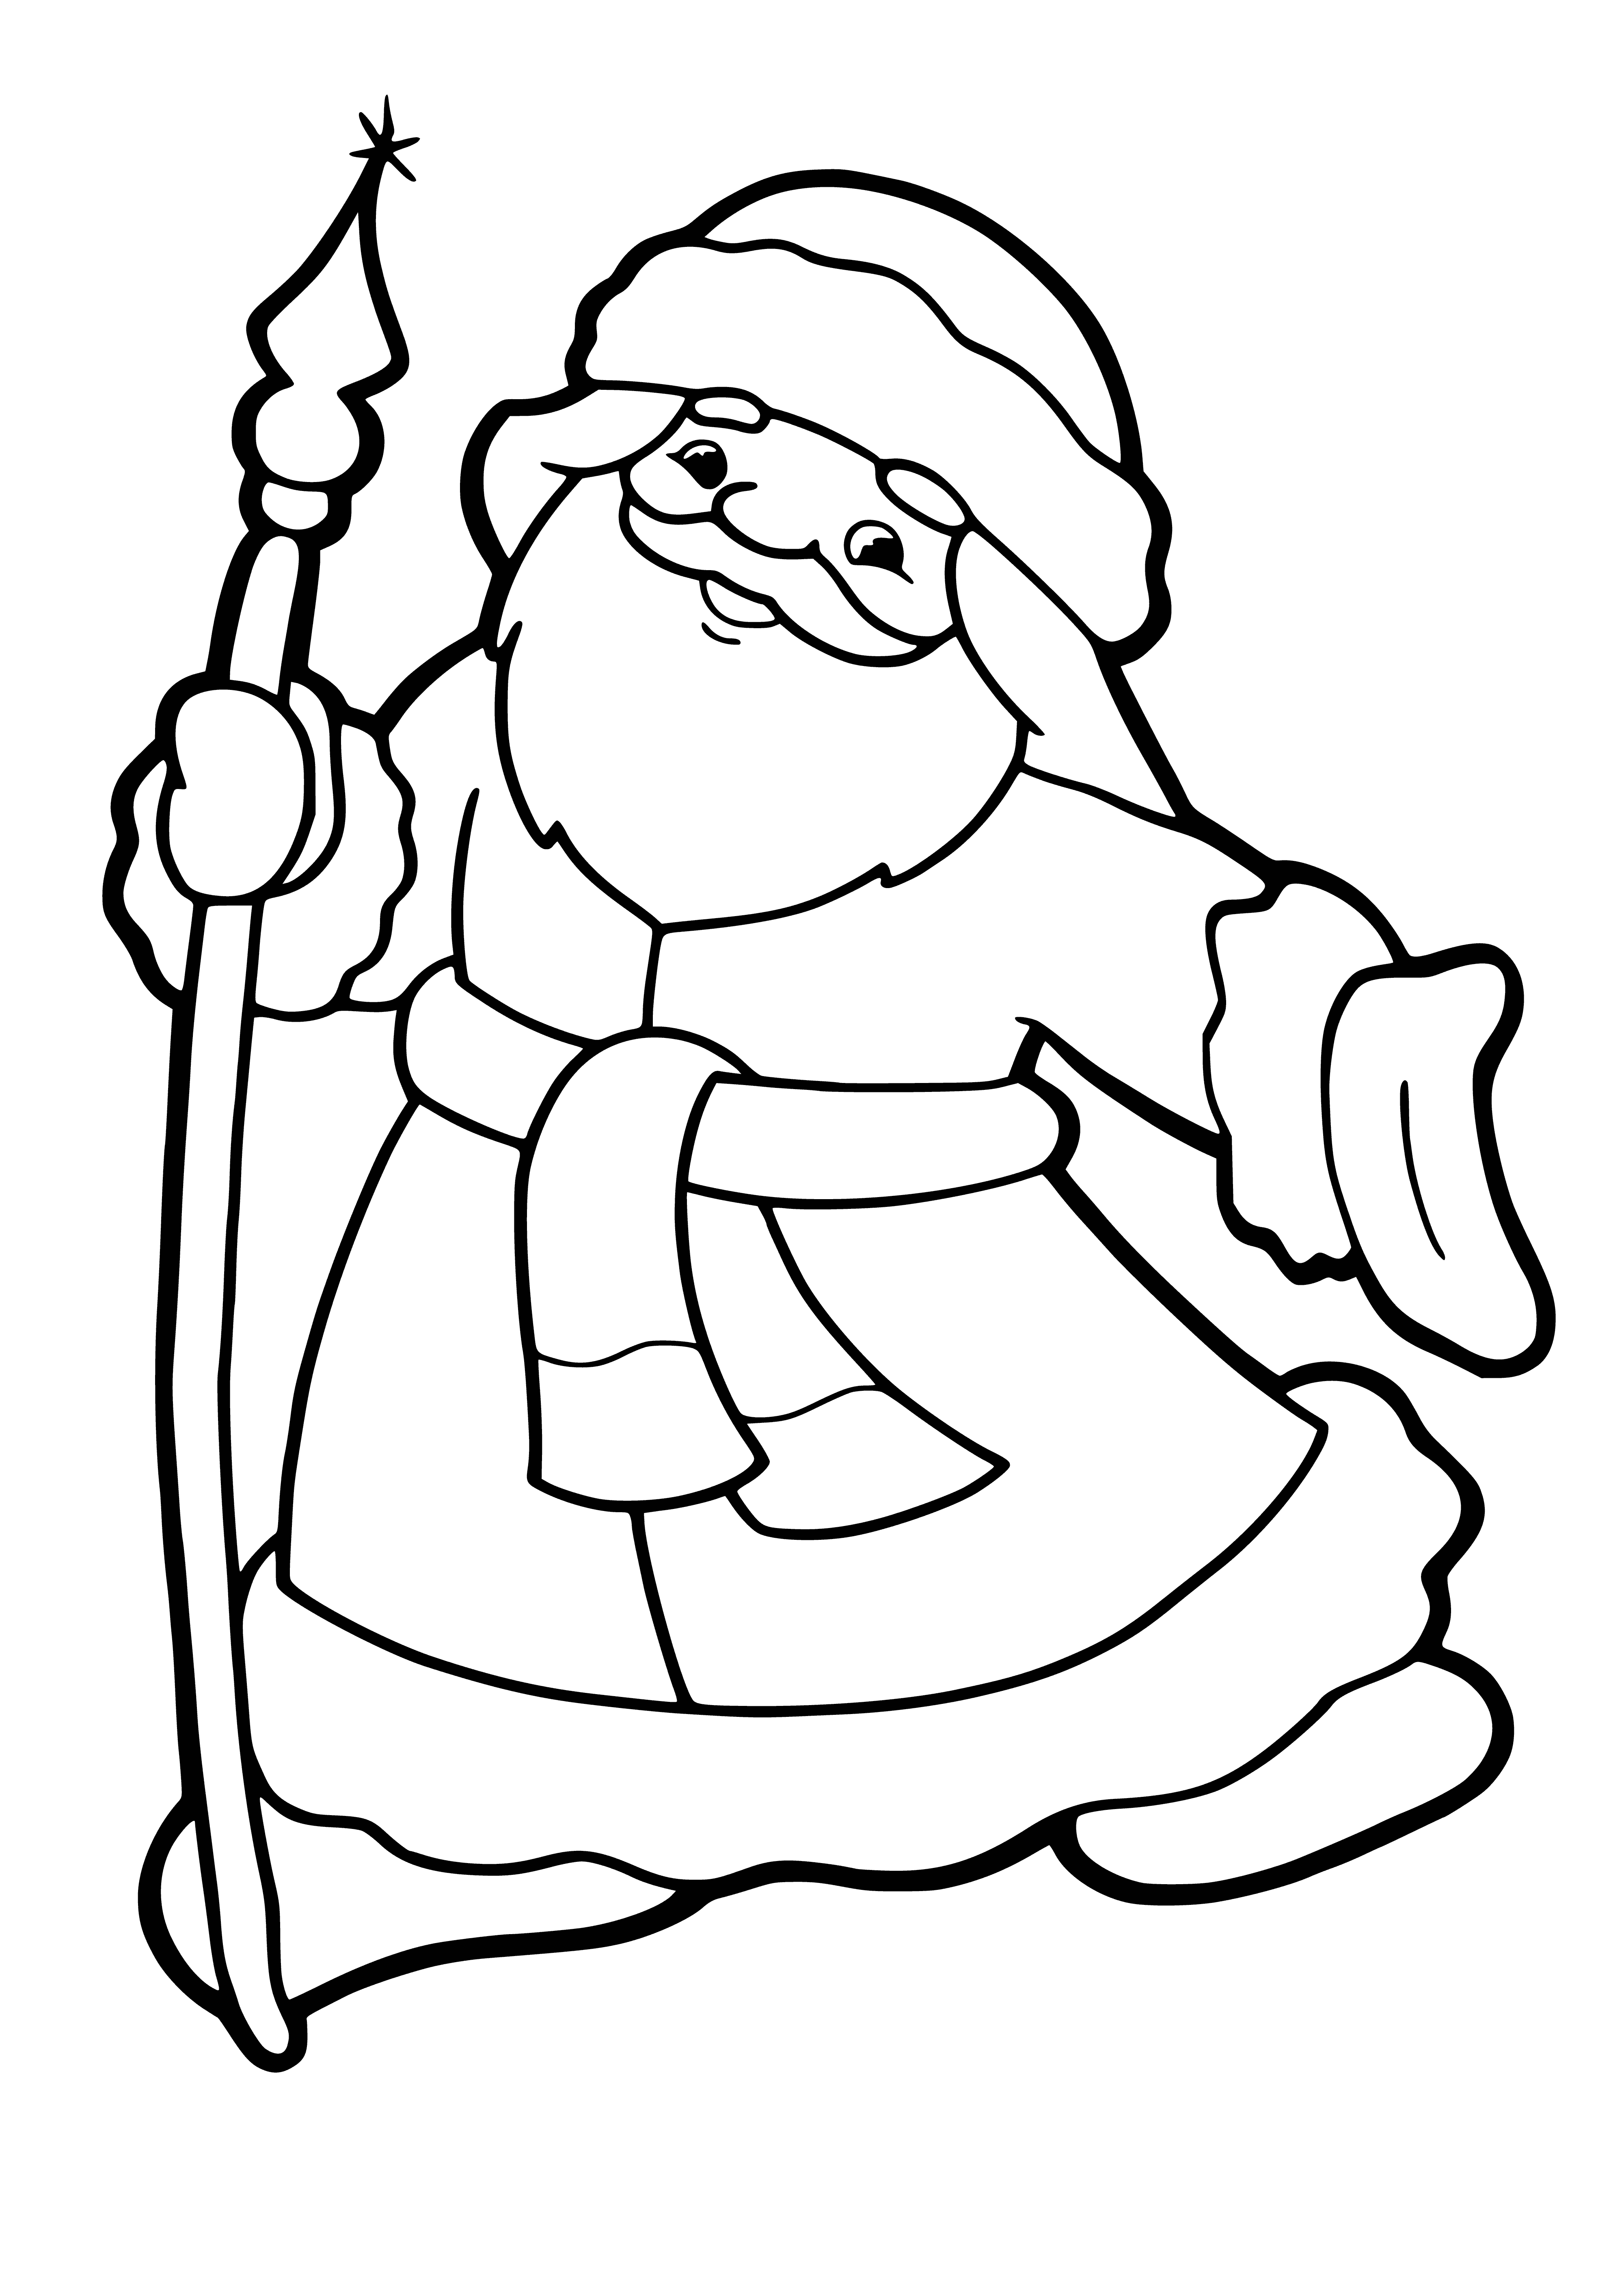 Jolly Santa Claus holds gifts by a cozy fireplace with a festive Christmas wreath.